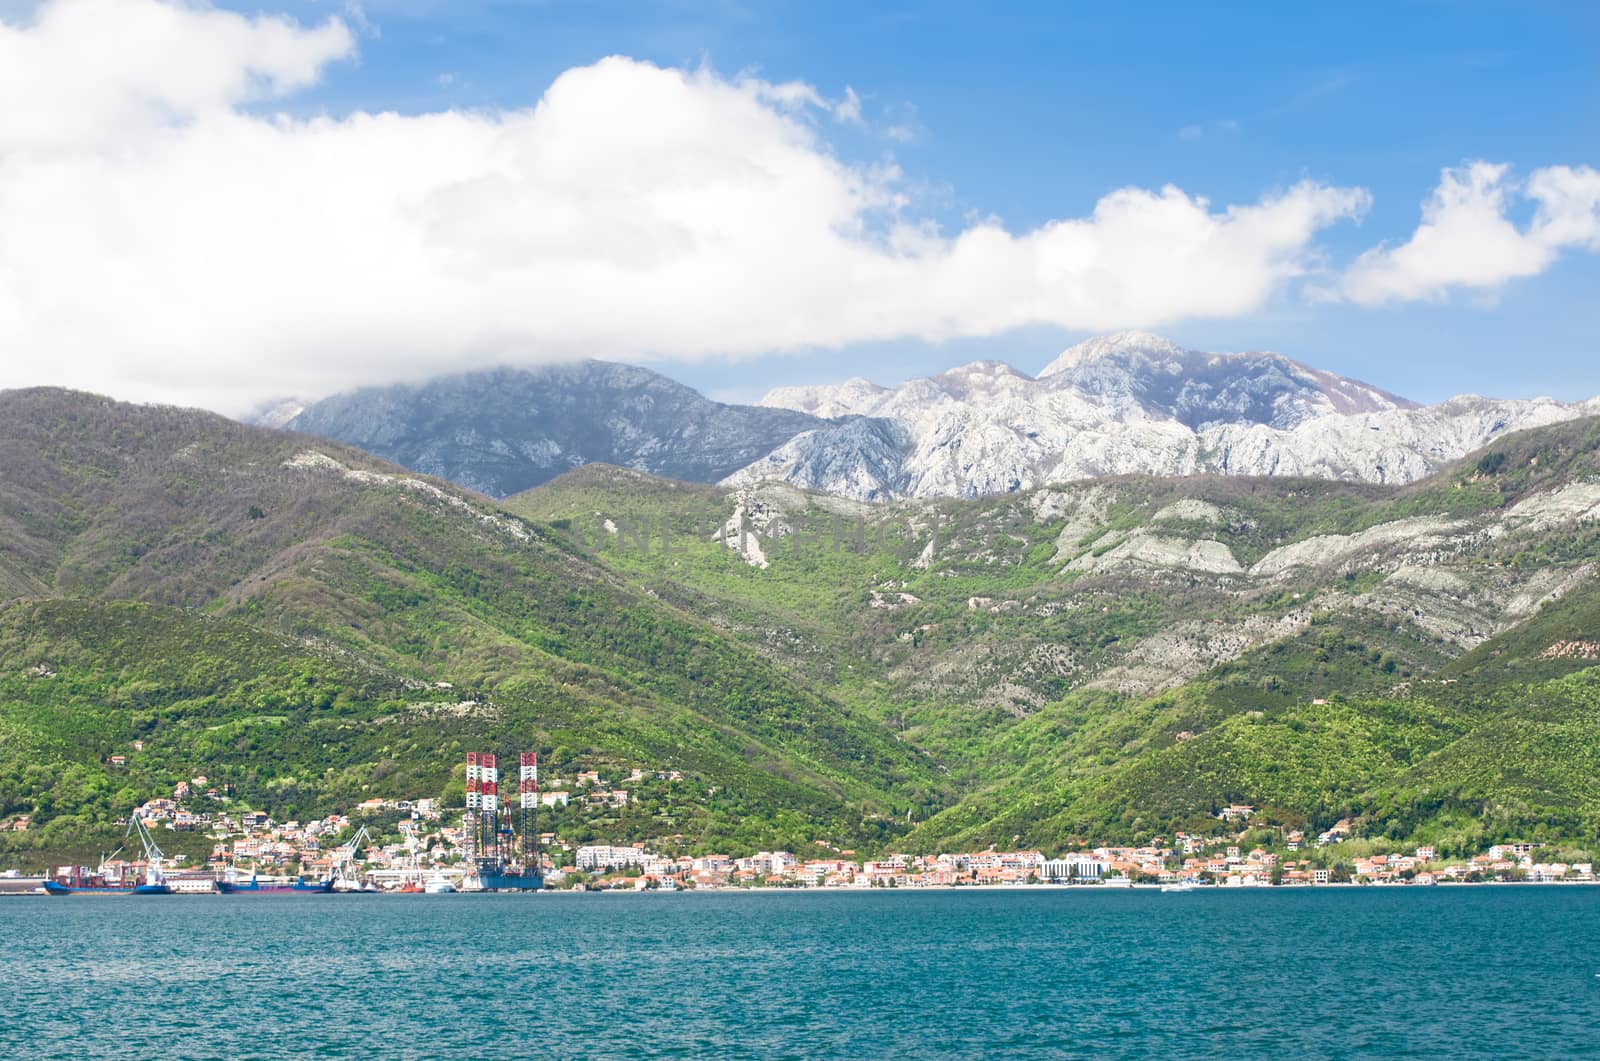 The Bay of Kotor view in spring